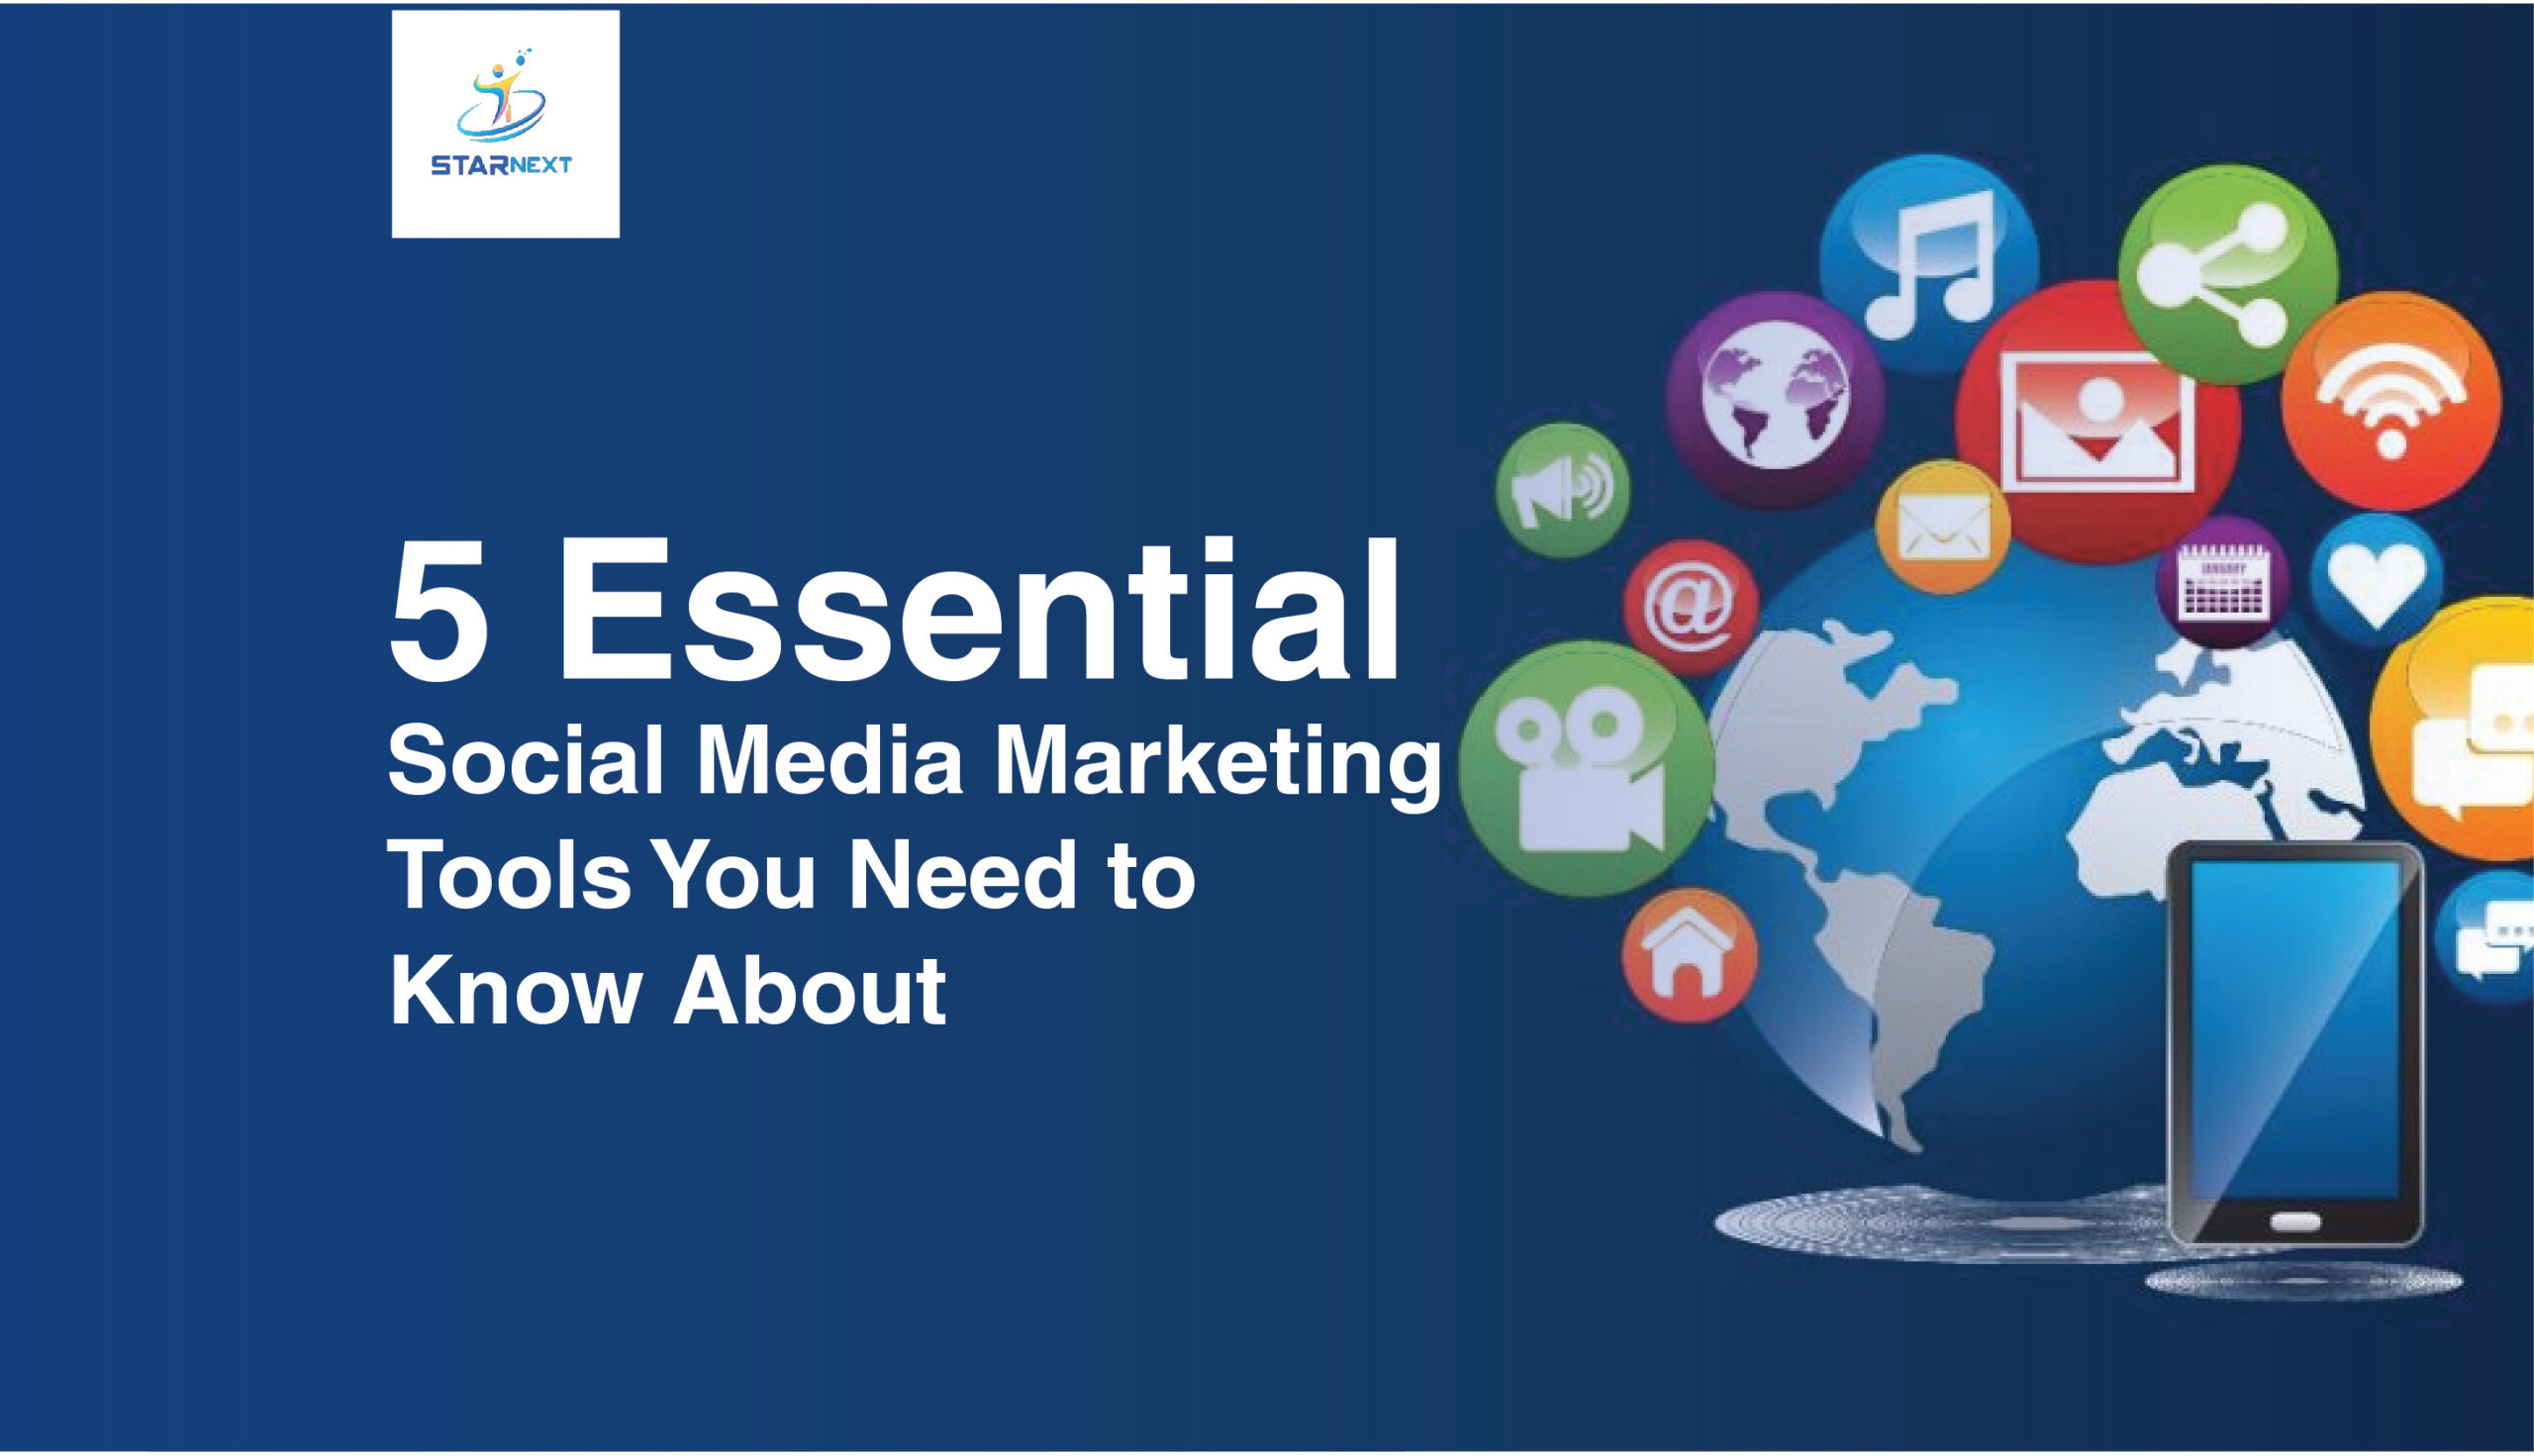 5 Essential Social Media Marketing Tools You Need to Know About